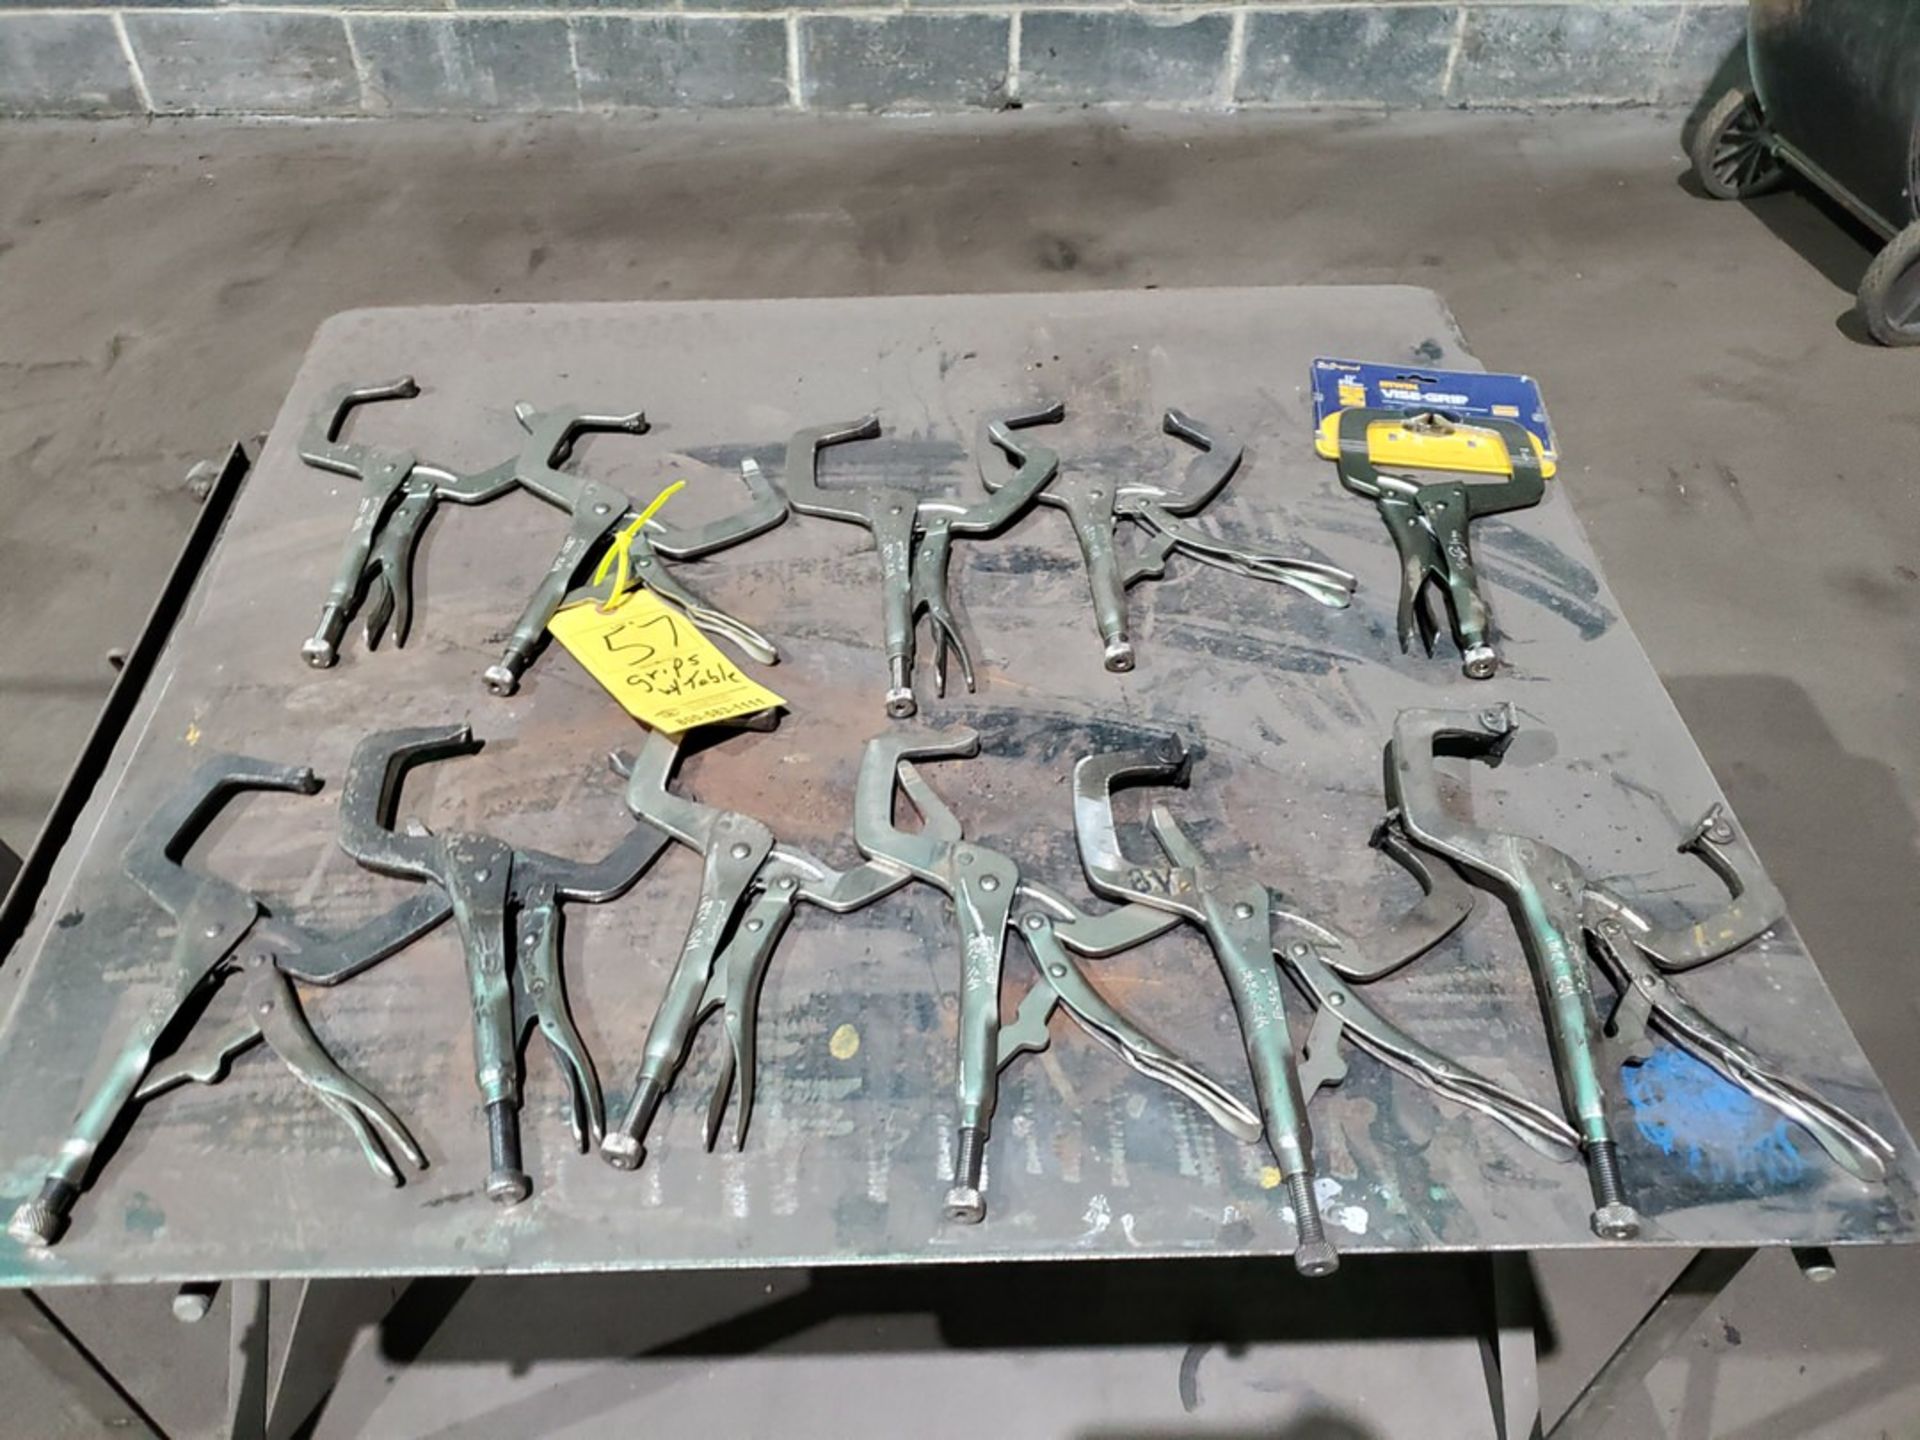 Assorted Vise Grips W/ Stl Table, 32" x 36" x 30"H - Image 3 of 4